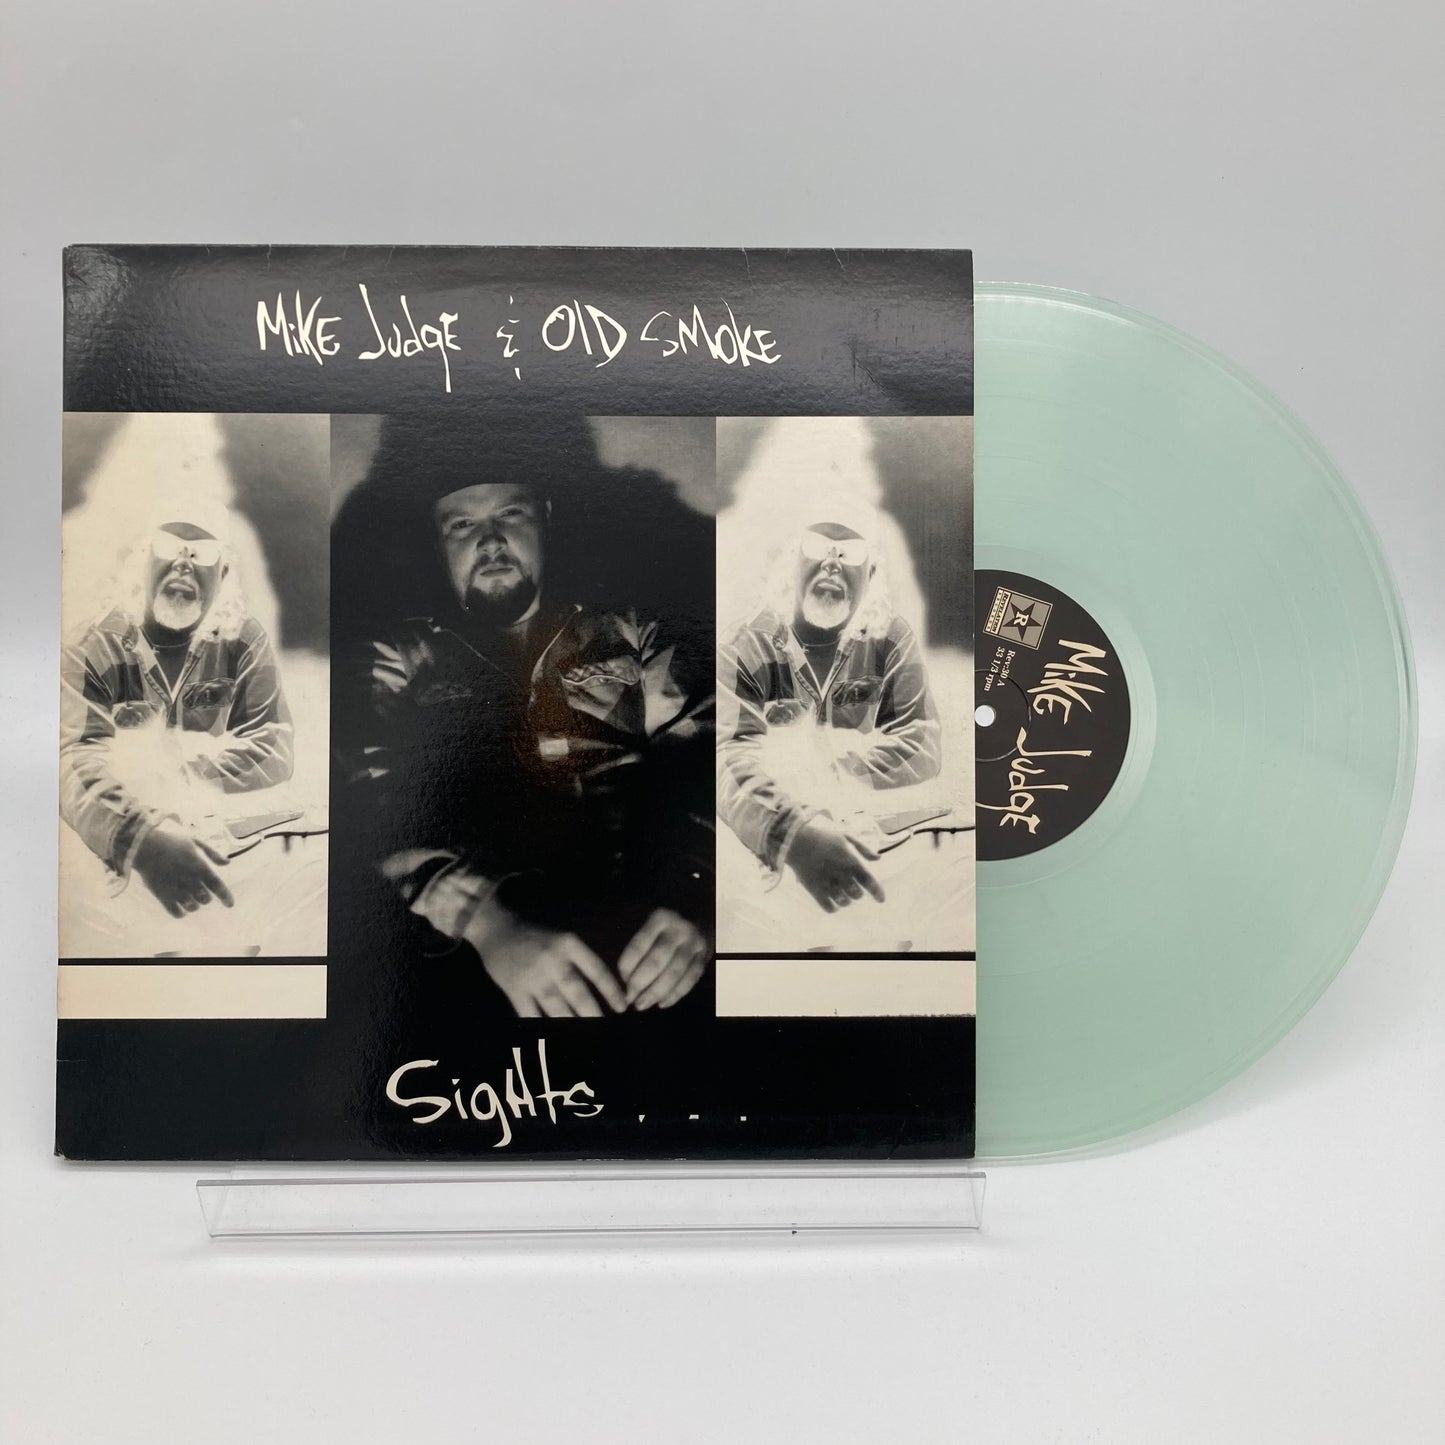 MIKE JUDGE & OLD SMOKE • Sights ... (Clear Vinyl) • LP • Second Hand